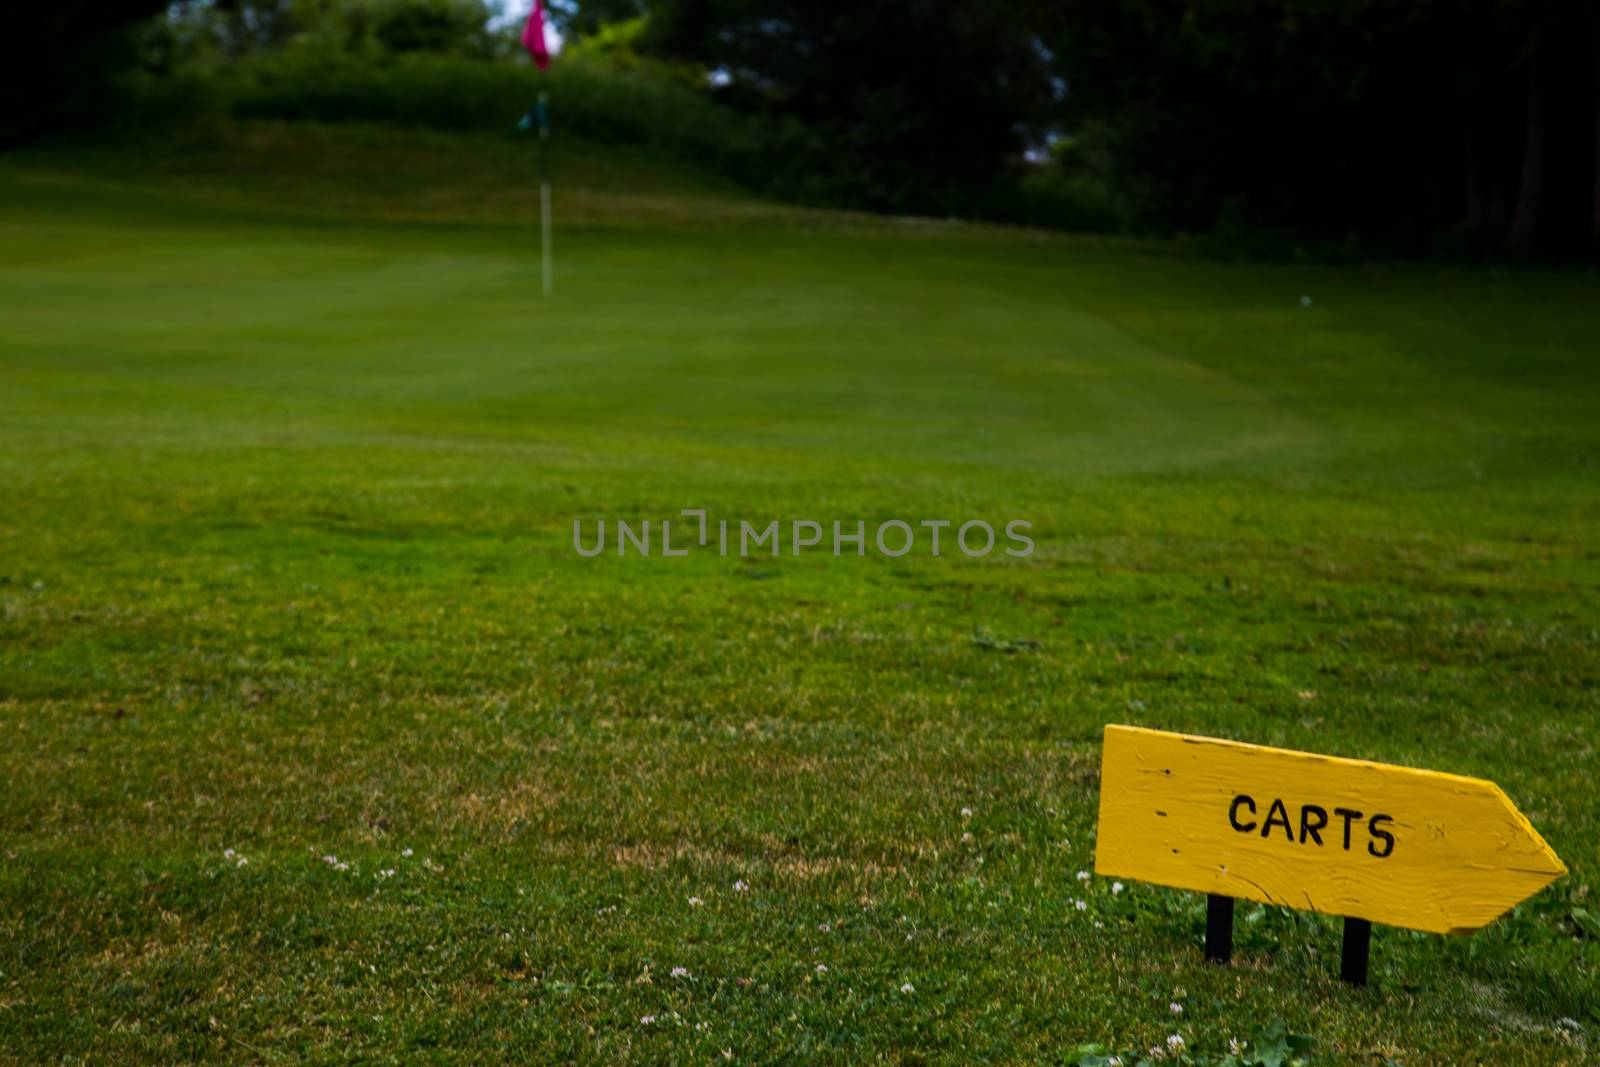 A yellow wooden handmade sign on a golf course directs golf carts away from the green with an arrow.